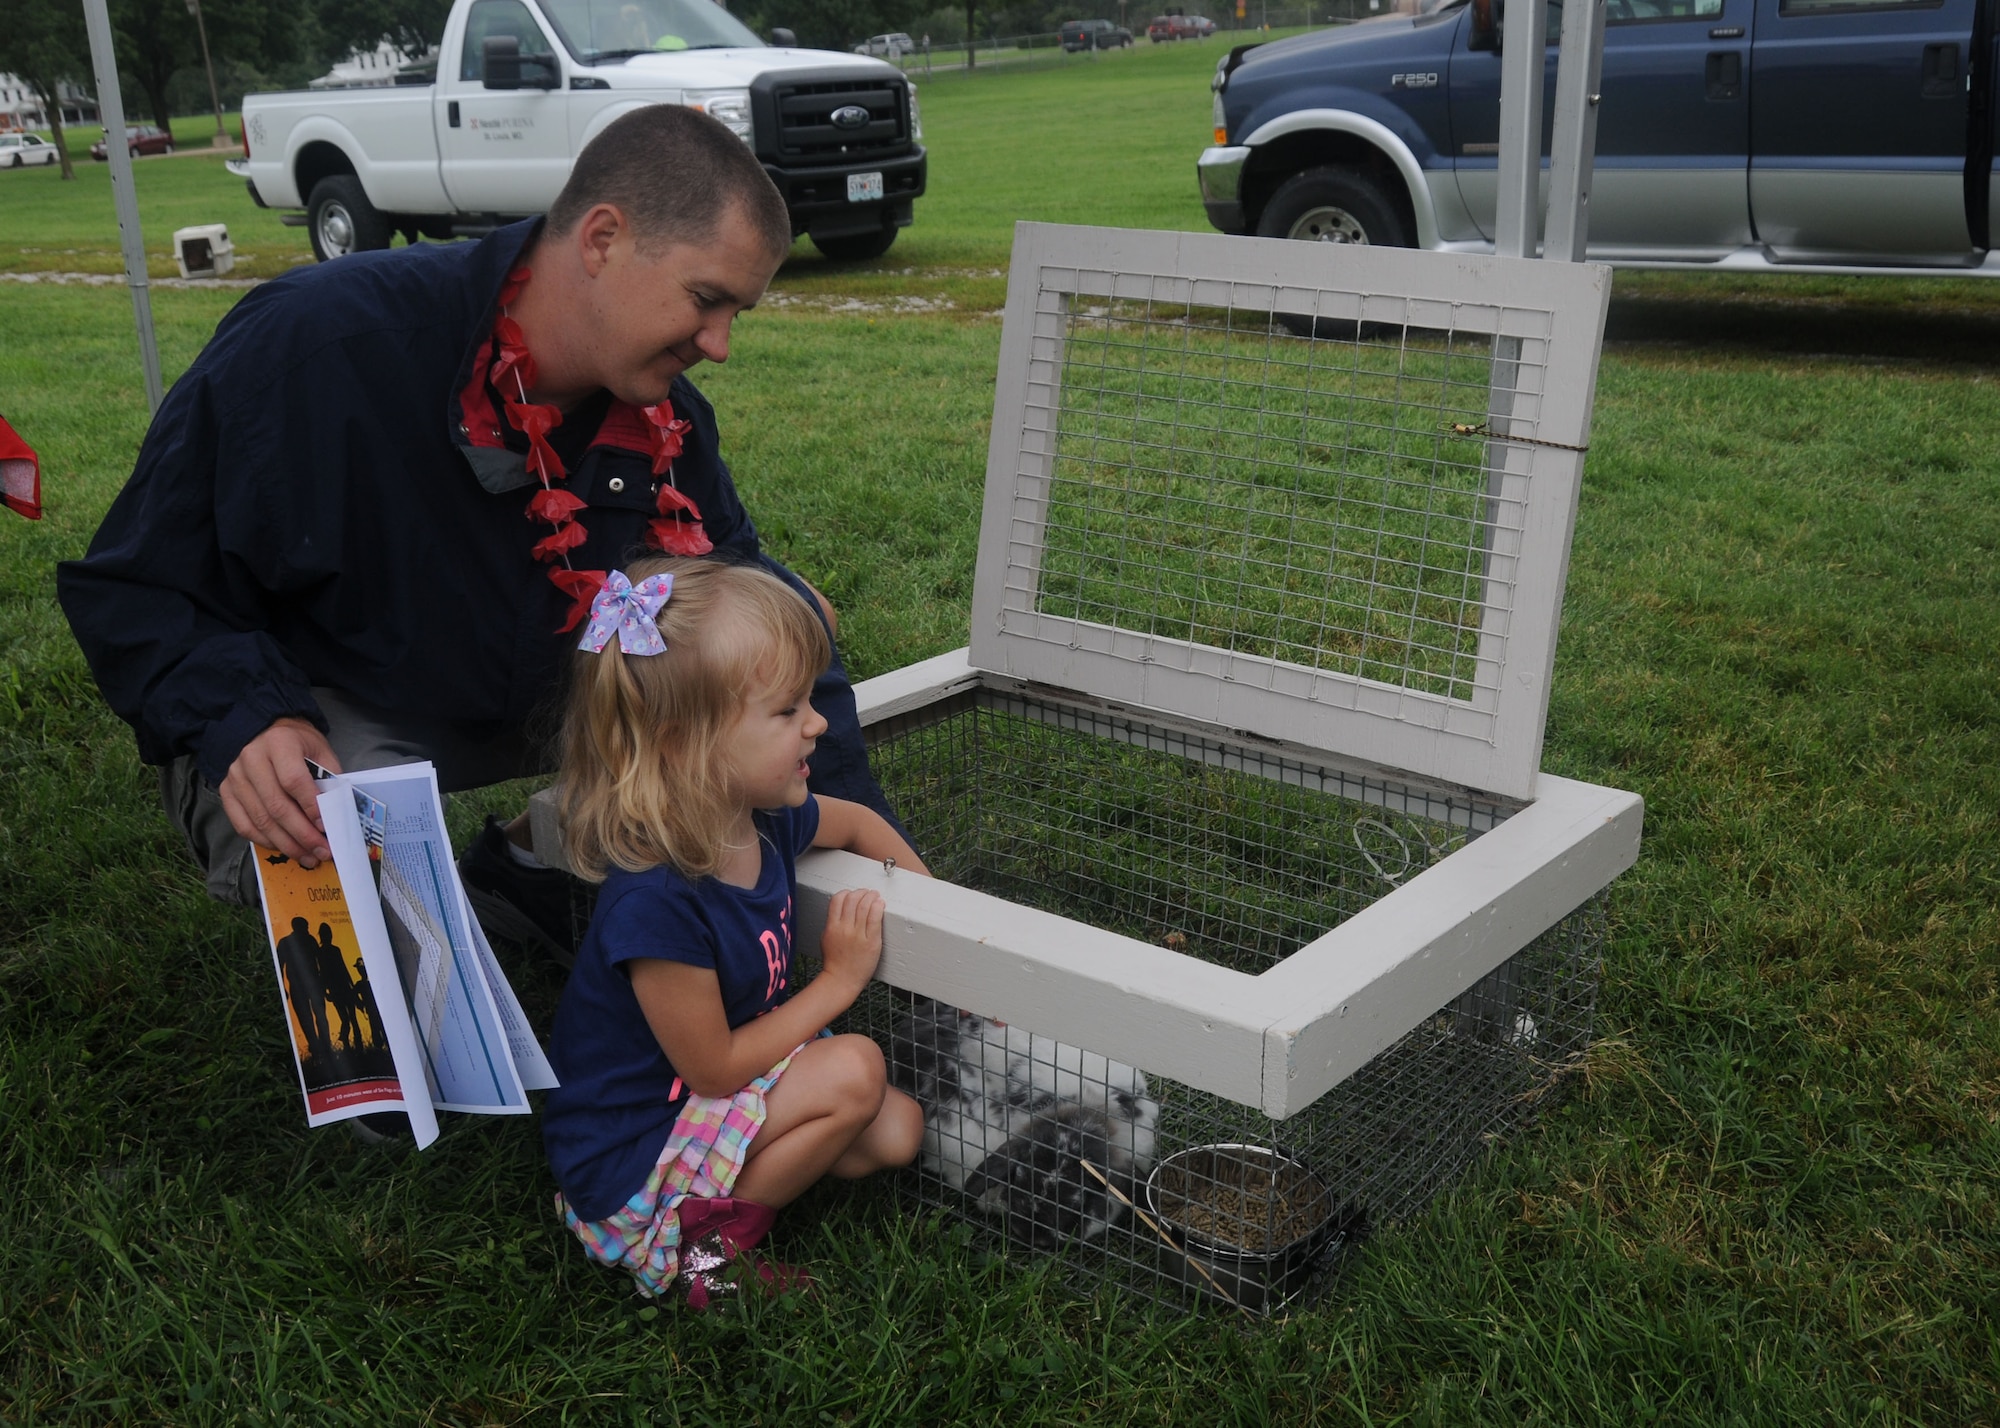 Senior Airman Ben Middleton,157th Air Operations Group, watches his daughter as she participates at the petting zoo organized by Purina Farms during the 2014 Family Picnic at Jefferson Barracks, Missouri on Sept. 6, 2014. Purina Farms also presented a dog show for Citizen Airmen and their Families at the event. (U.S. Air National Guard photo by Senior Airman Nathan Dampf)

